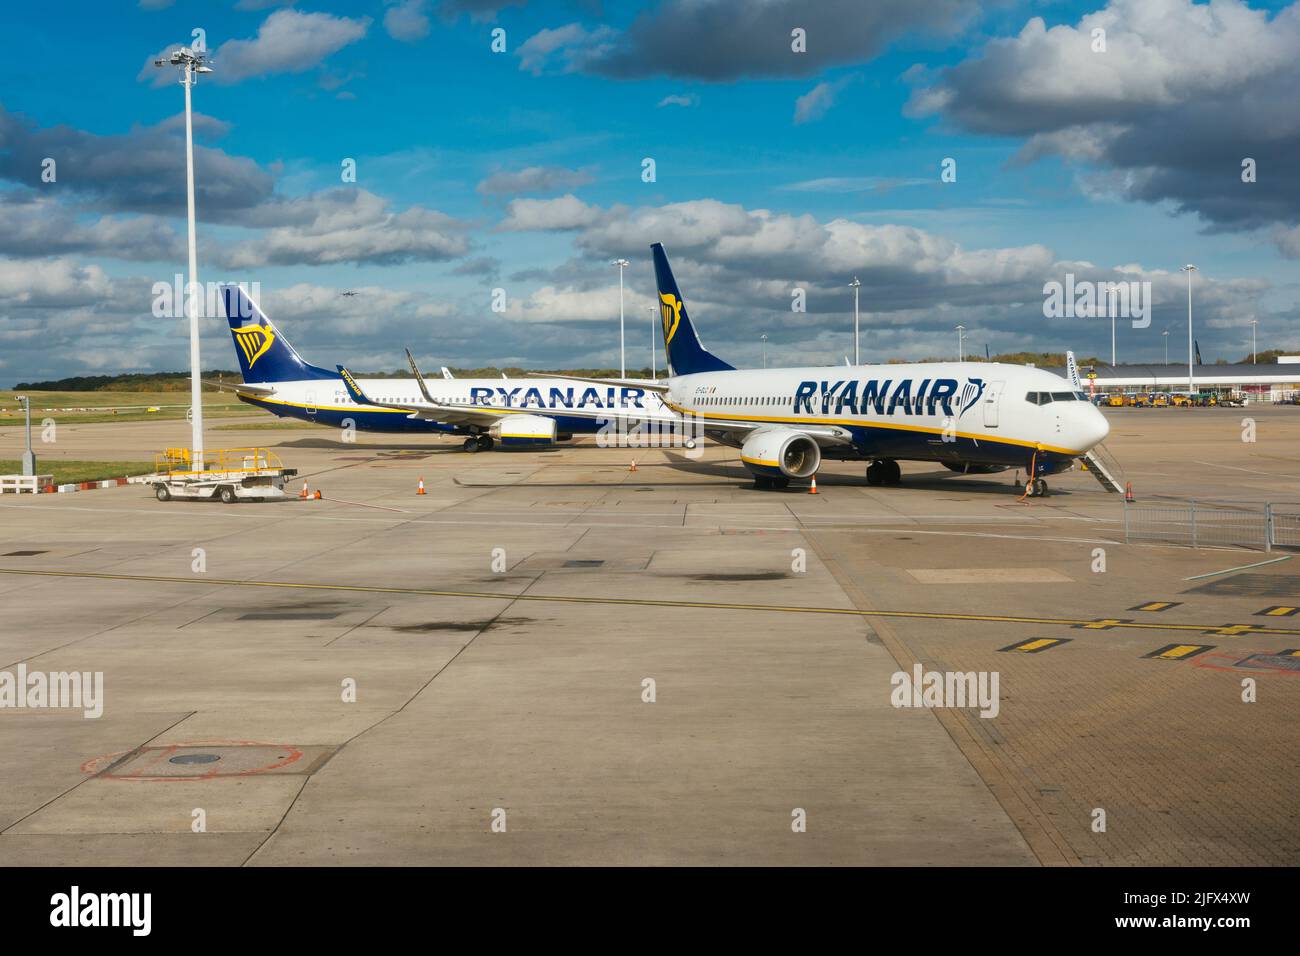 Two Ryanair planes parked at London Stansted Airport. London Stansted Airport is an international airport located in Stansted Mountfitchet, Uttlesford Stock Photo